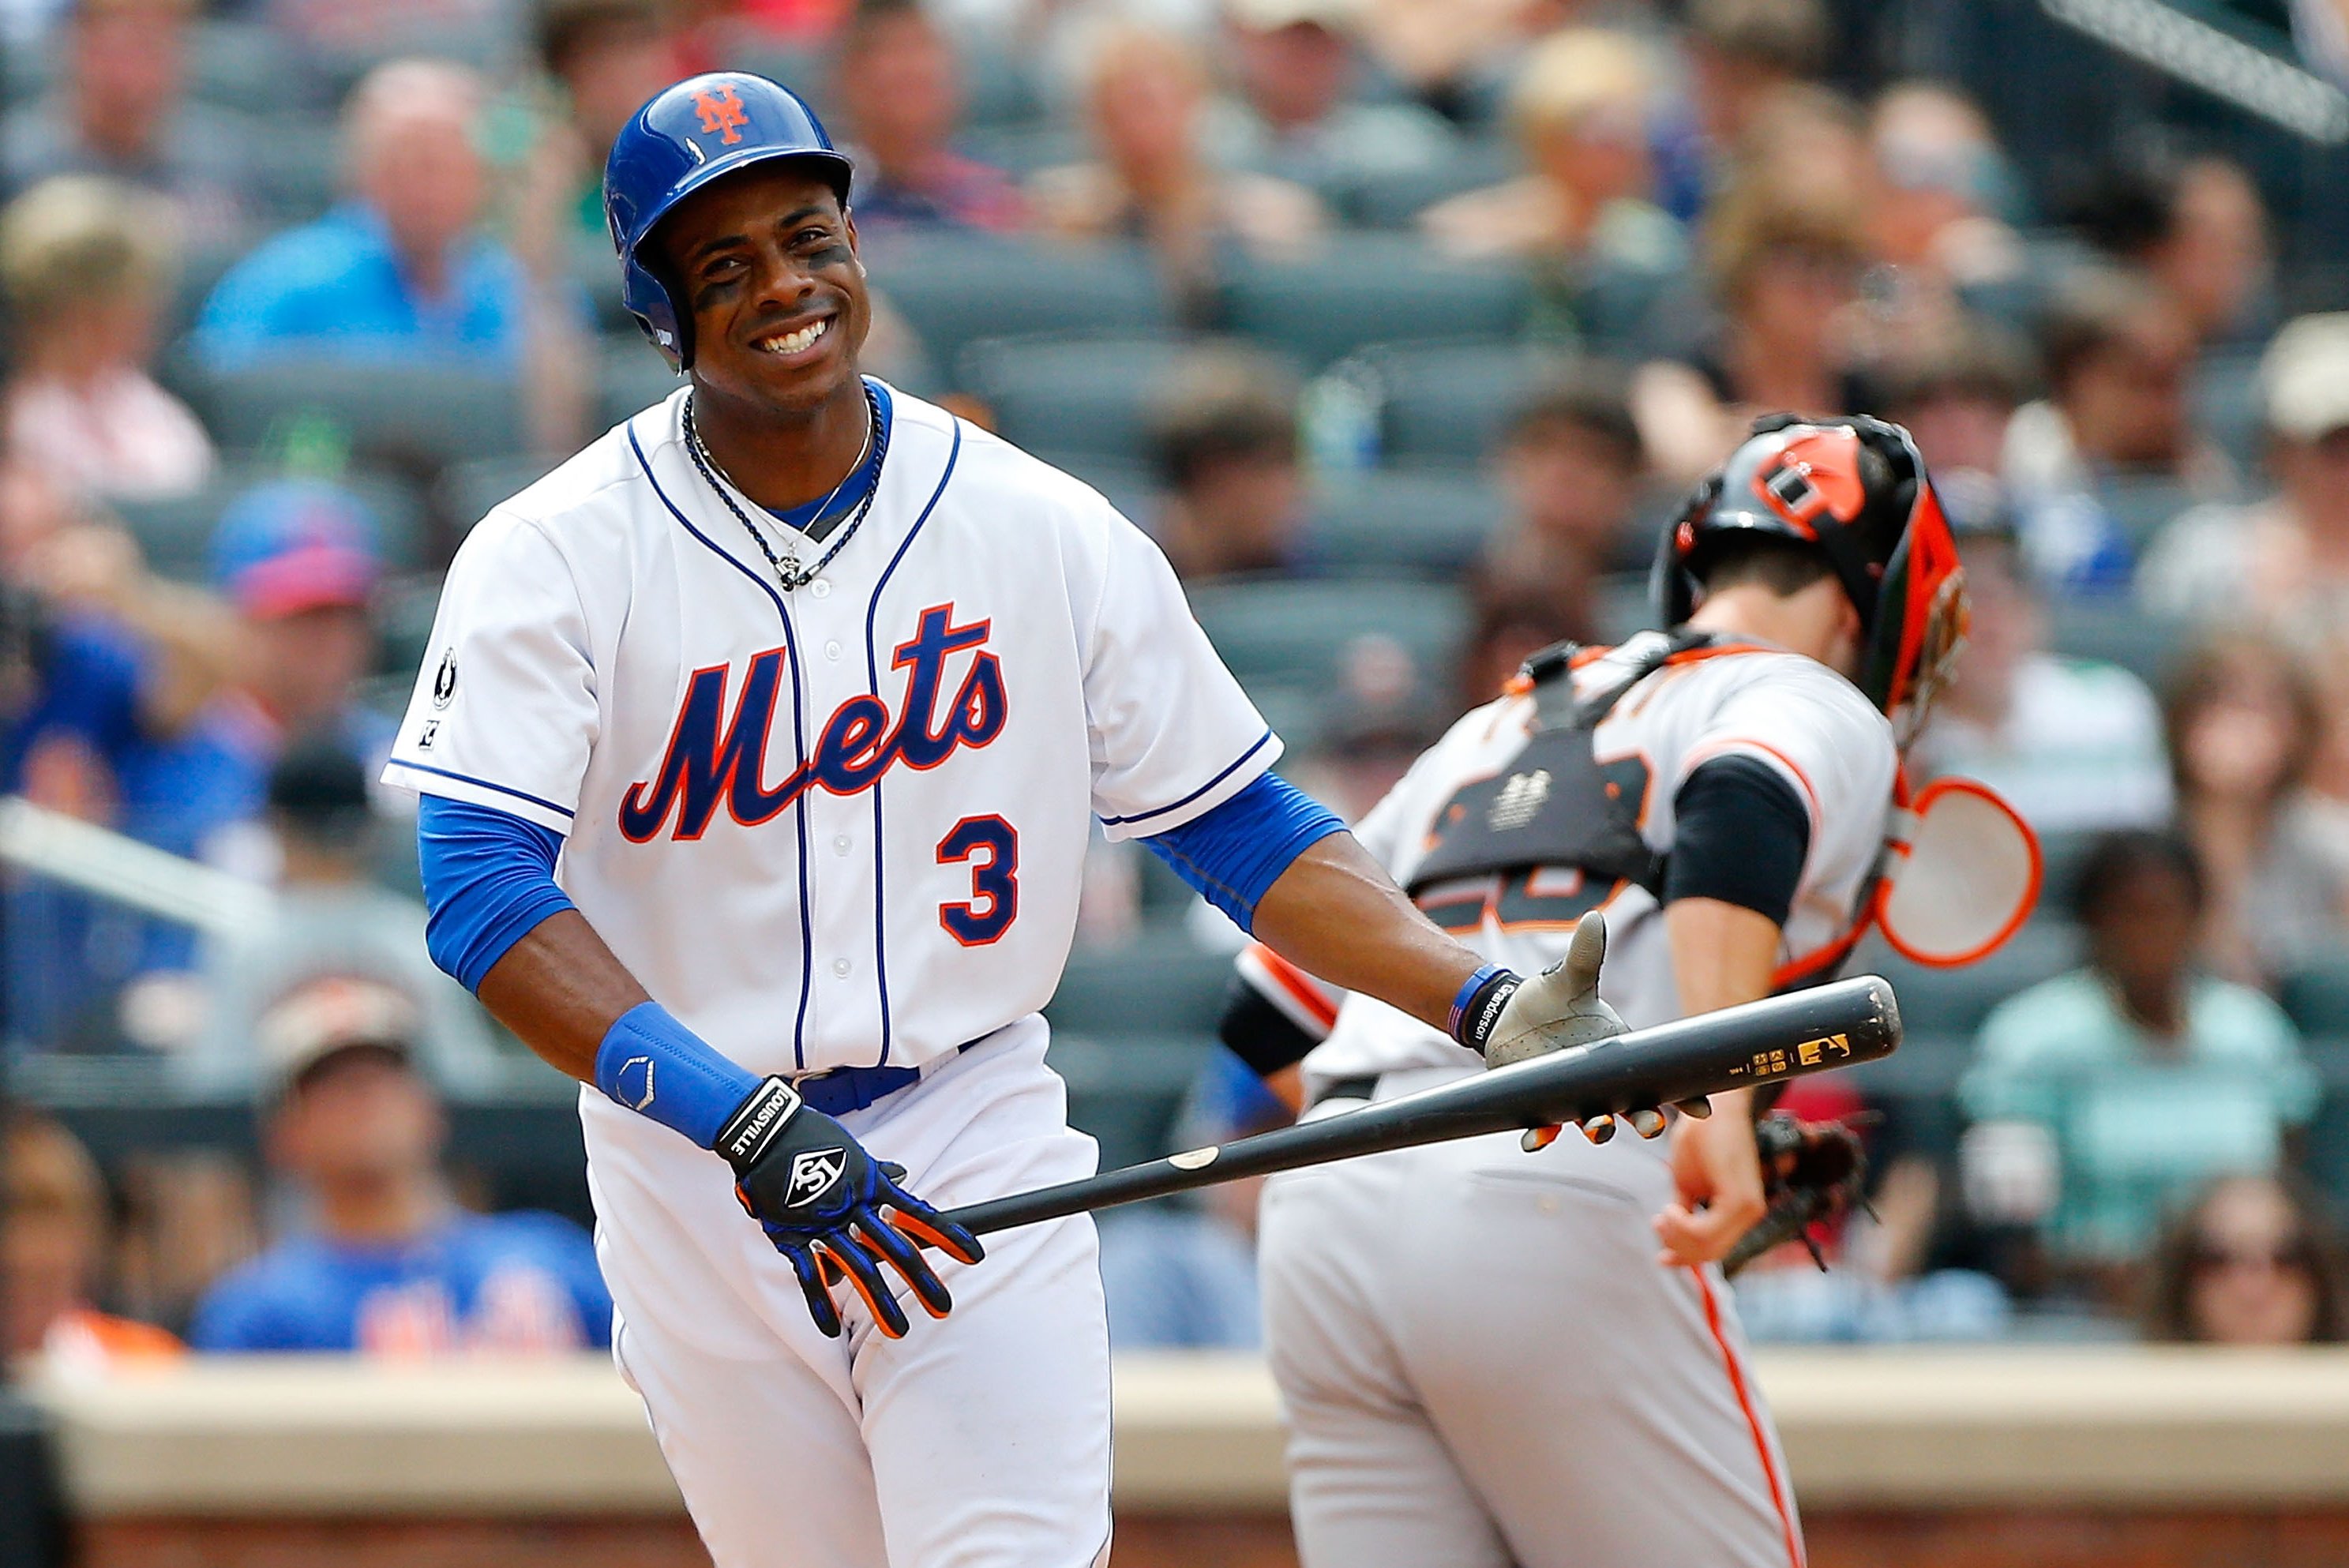 Granderson Finally Puts an End to His Otherwise Forgettable Day